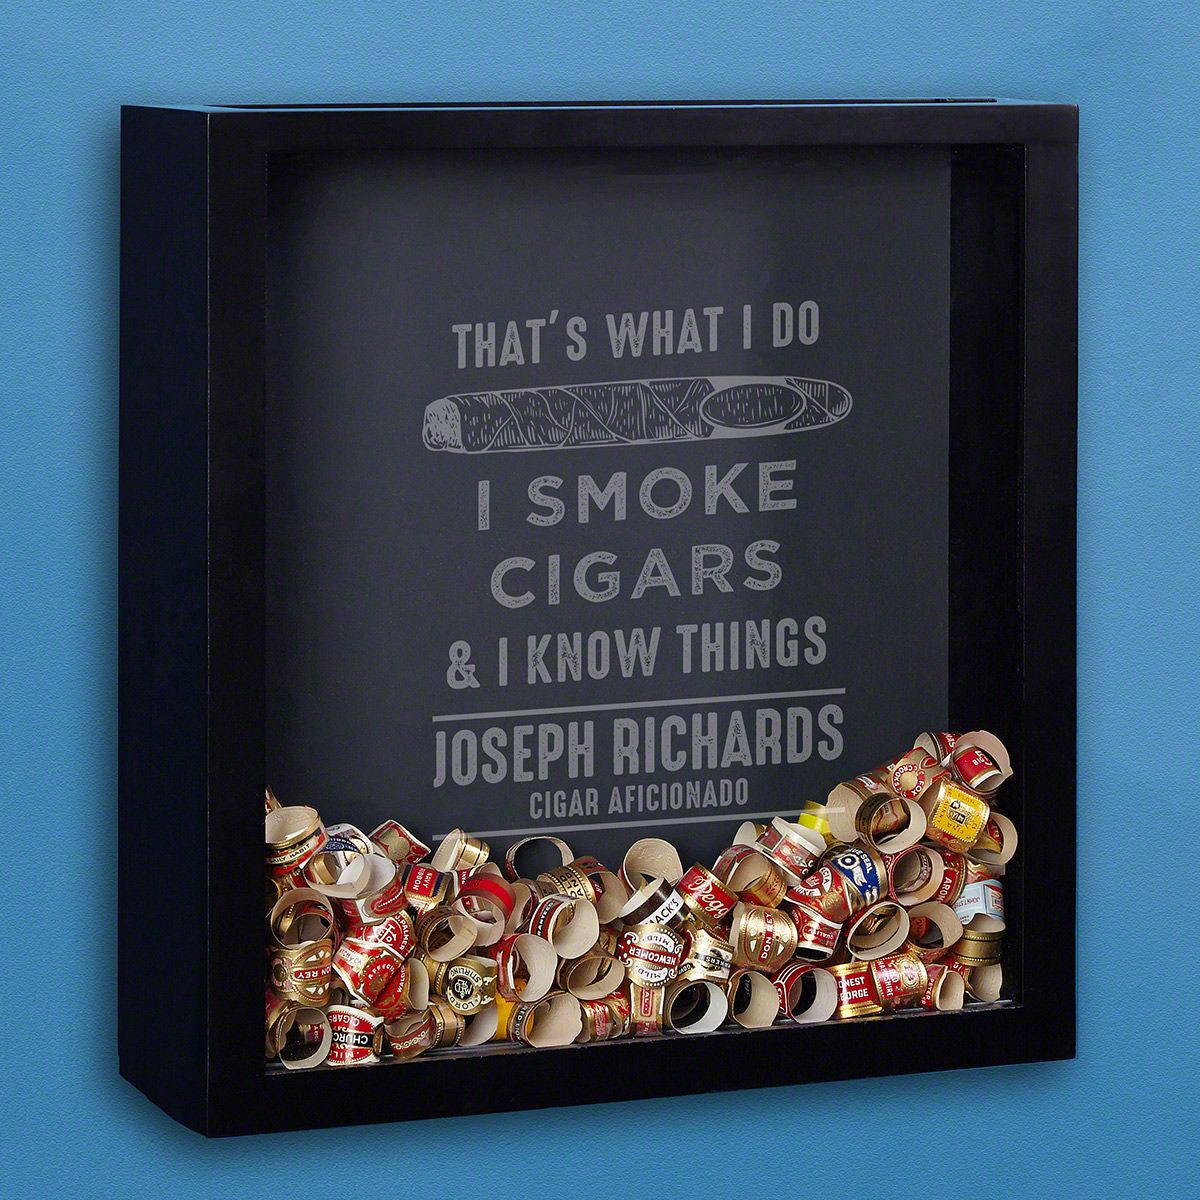 A cigar box that has a cigar's photo and "I smoke cigar & I know things" sentence print makes a great gift for him on valentine day